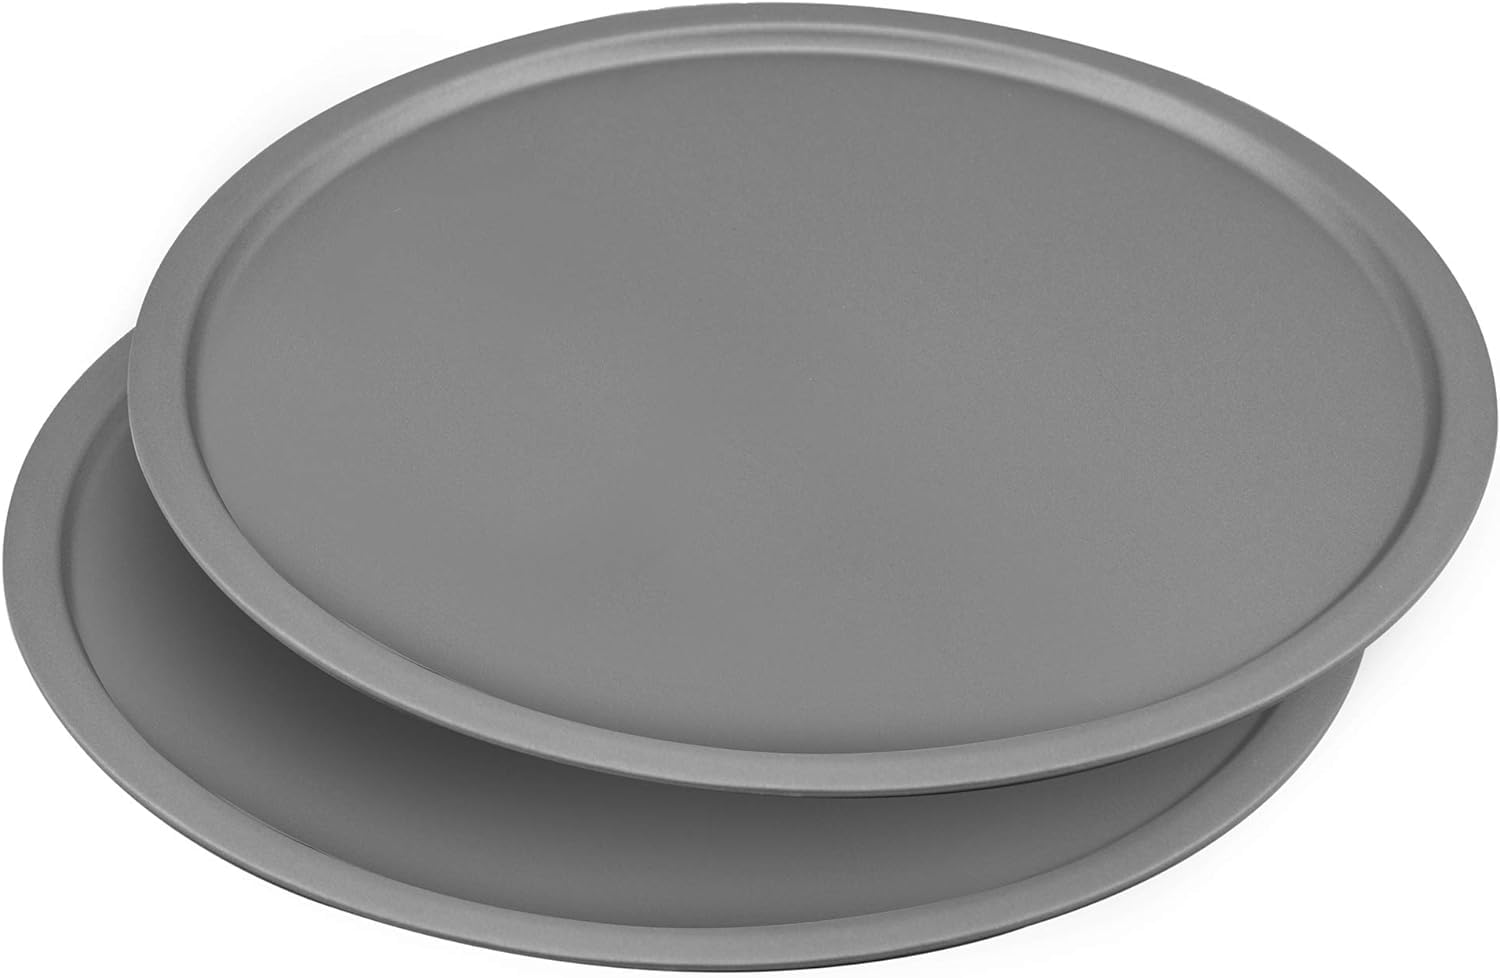 OvenStuff G & S Metal Products Company Nonstick 12-Inch Pizza Pans, Set of 2